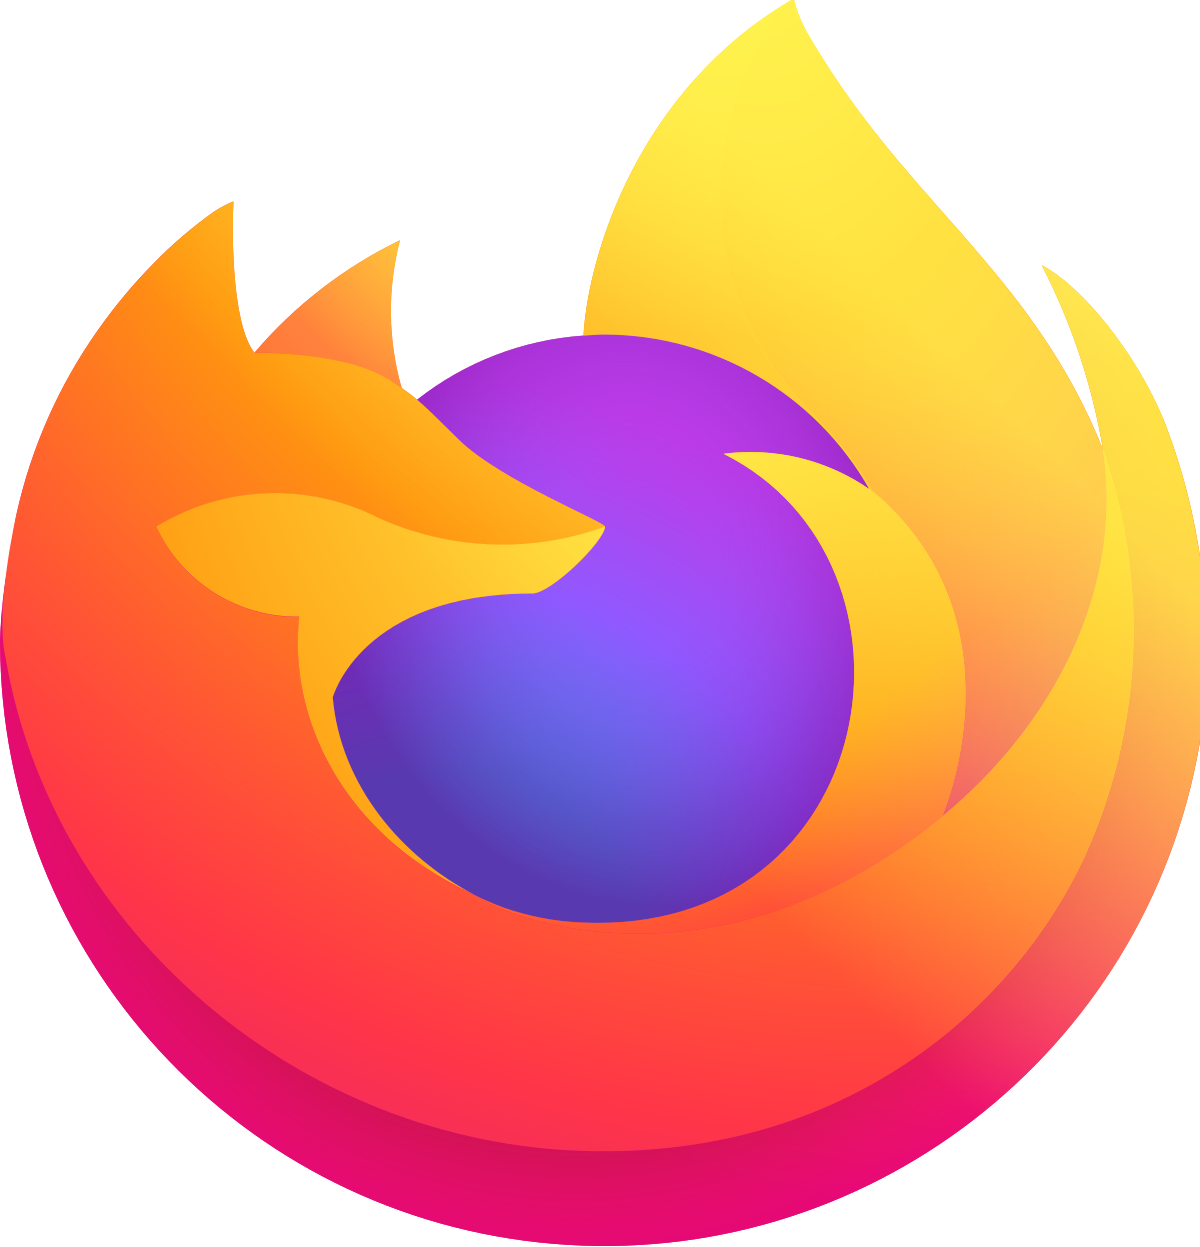 firefox chinese for mac